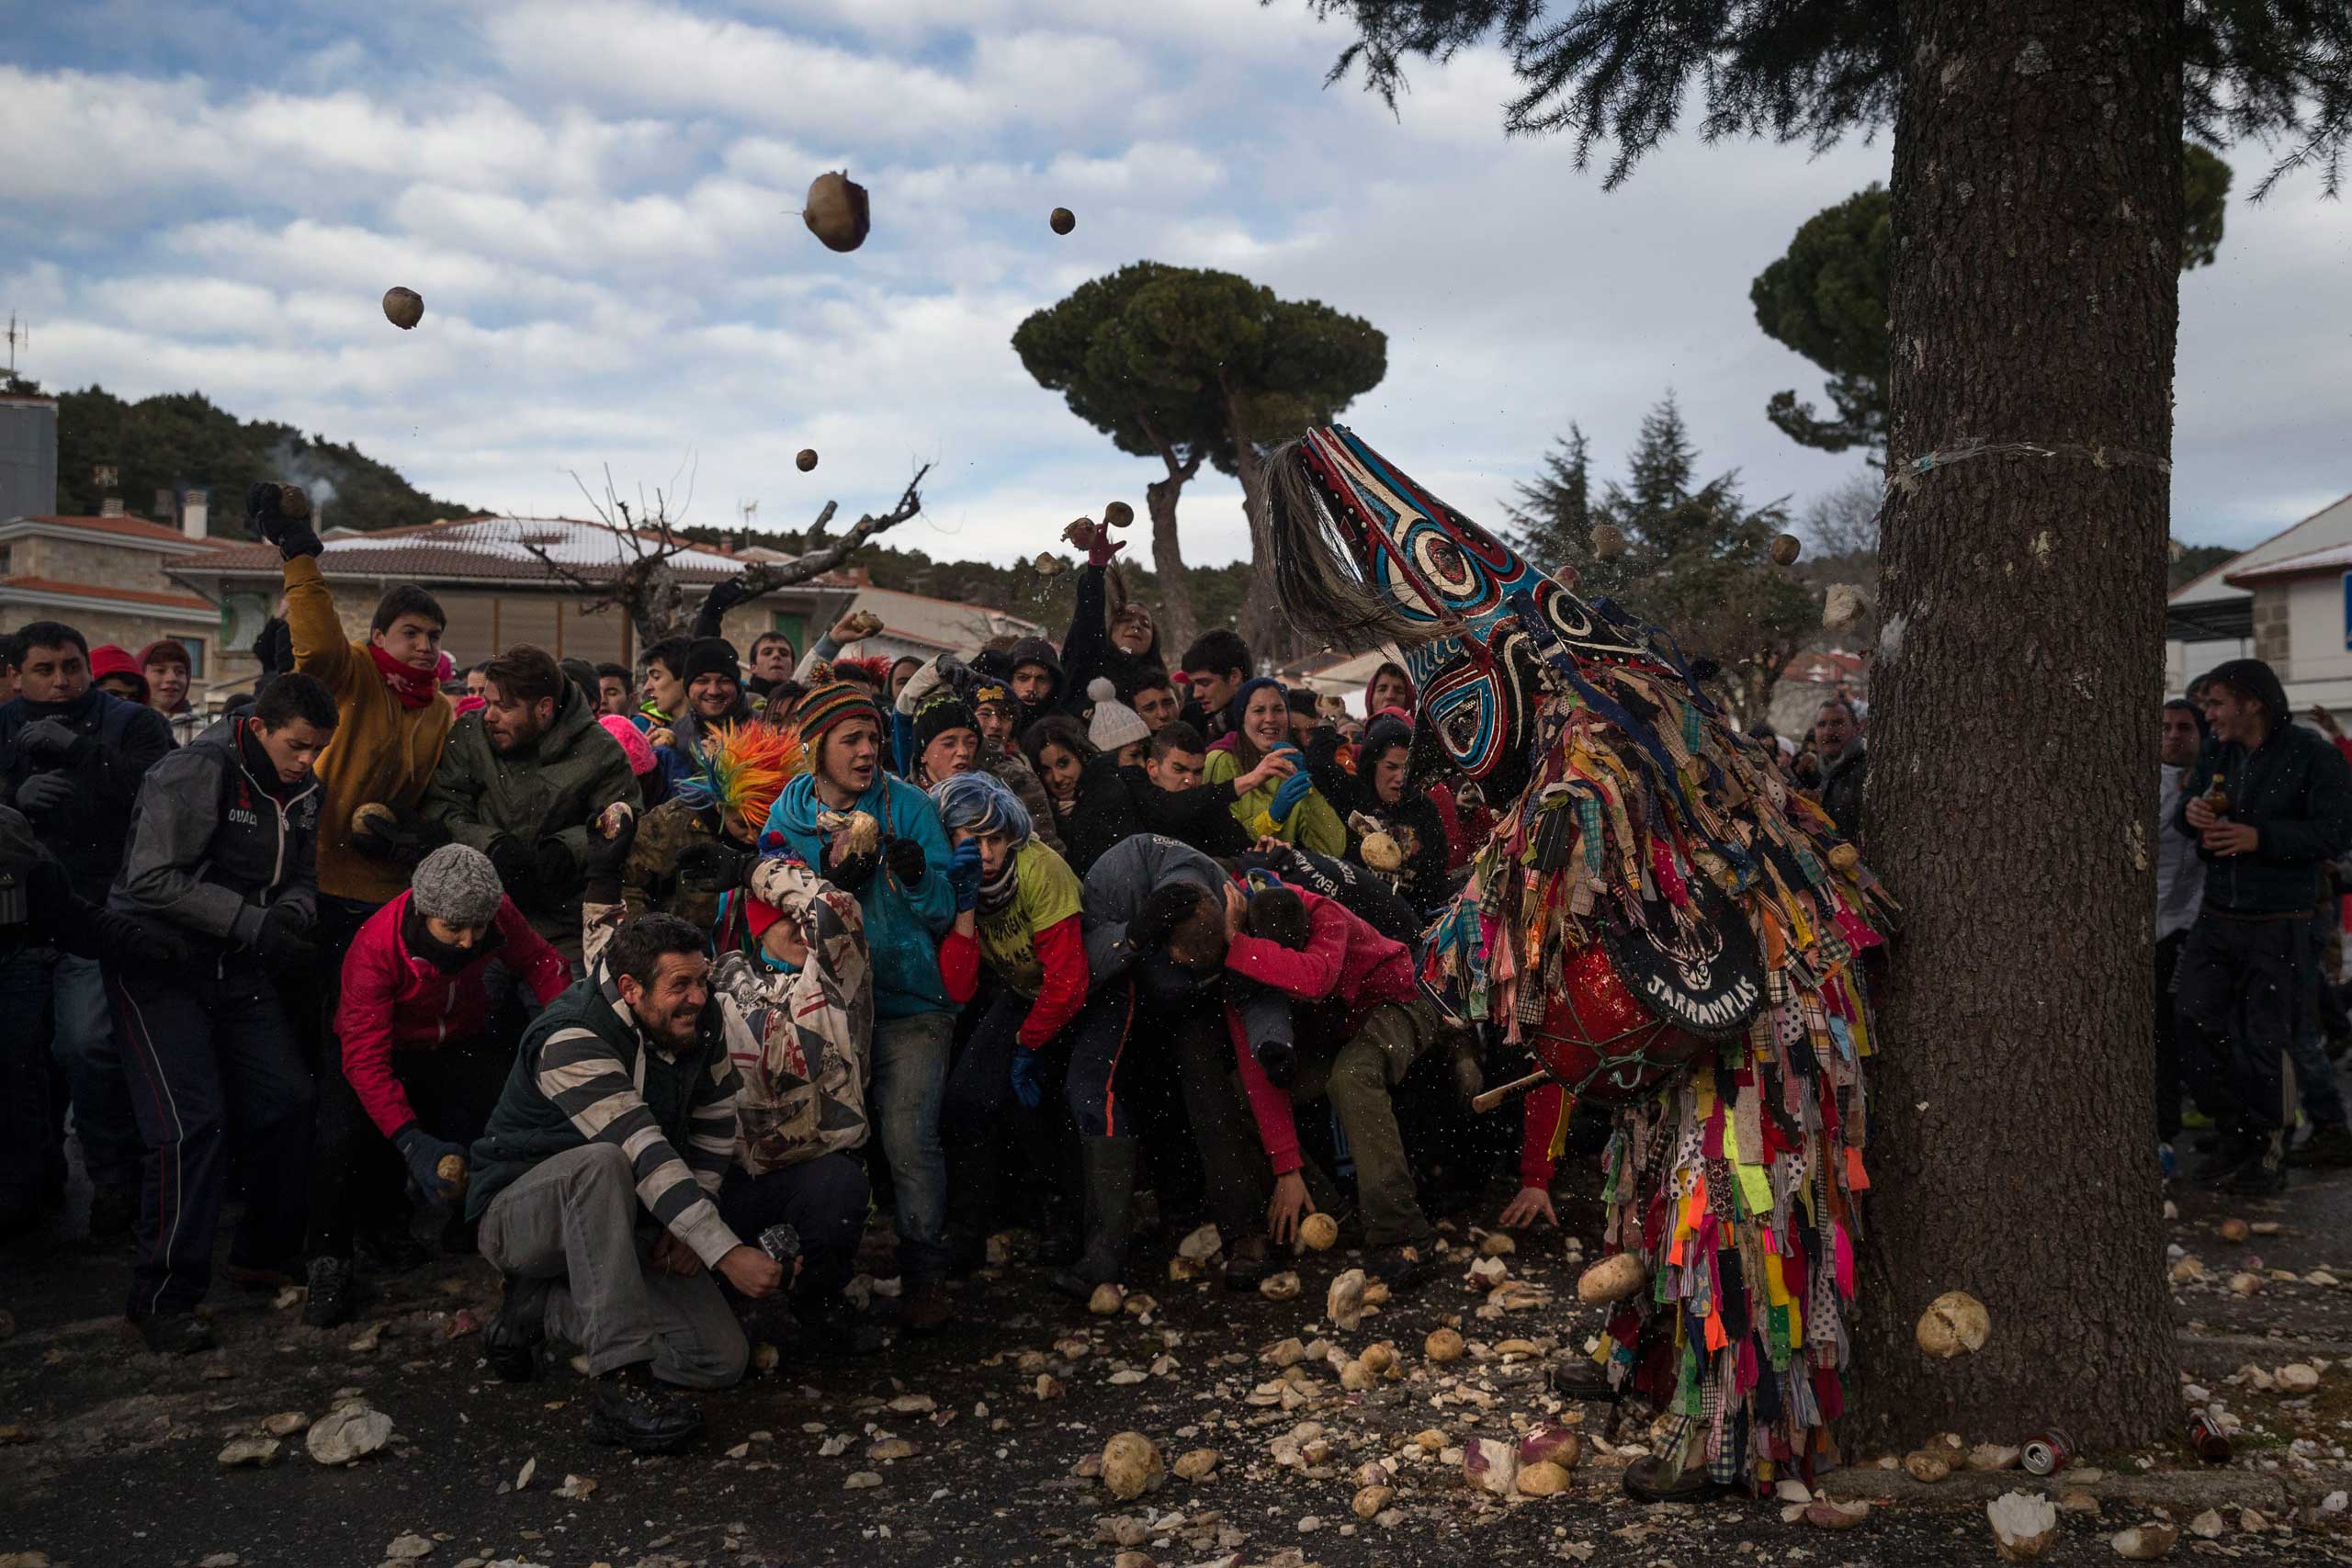 Jan. 19, 2015. People throw turnips at the Jarramplas as he makes his way through the streets beating his drum during the Jarramplas Festival in Spain. Jarramplas is a character that wears a costume made from colorful strips of fabric, and a devil-like mask and beats a drum through the streets of Piornal while residents throw turnips as a punishment for stealing cattle.